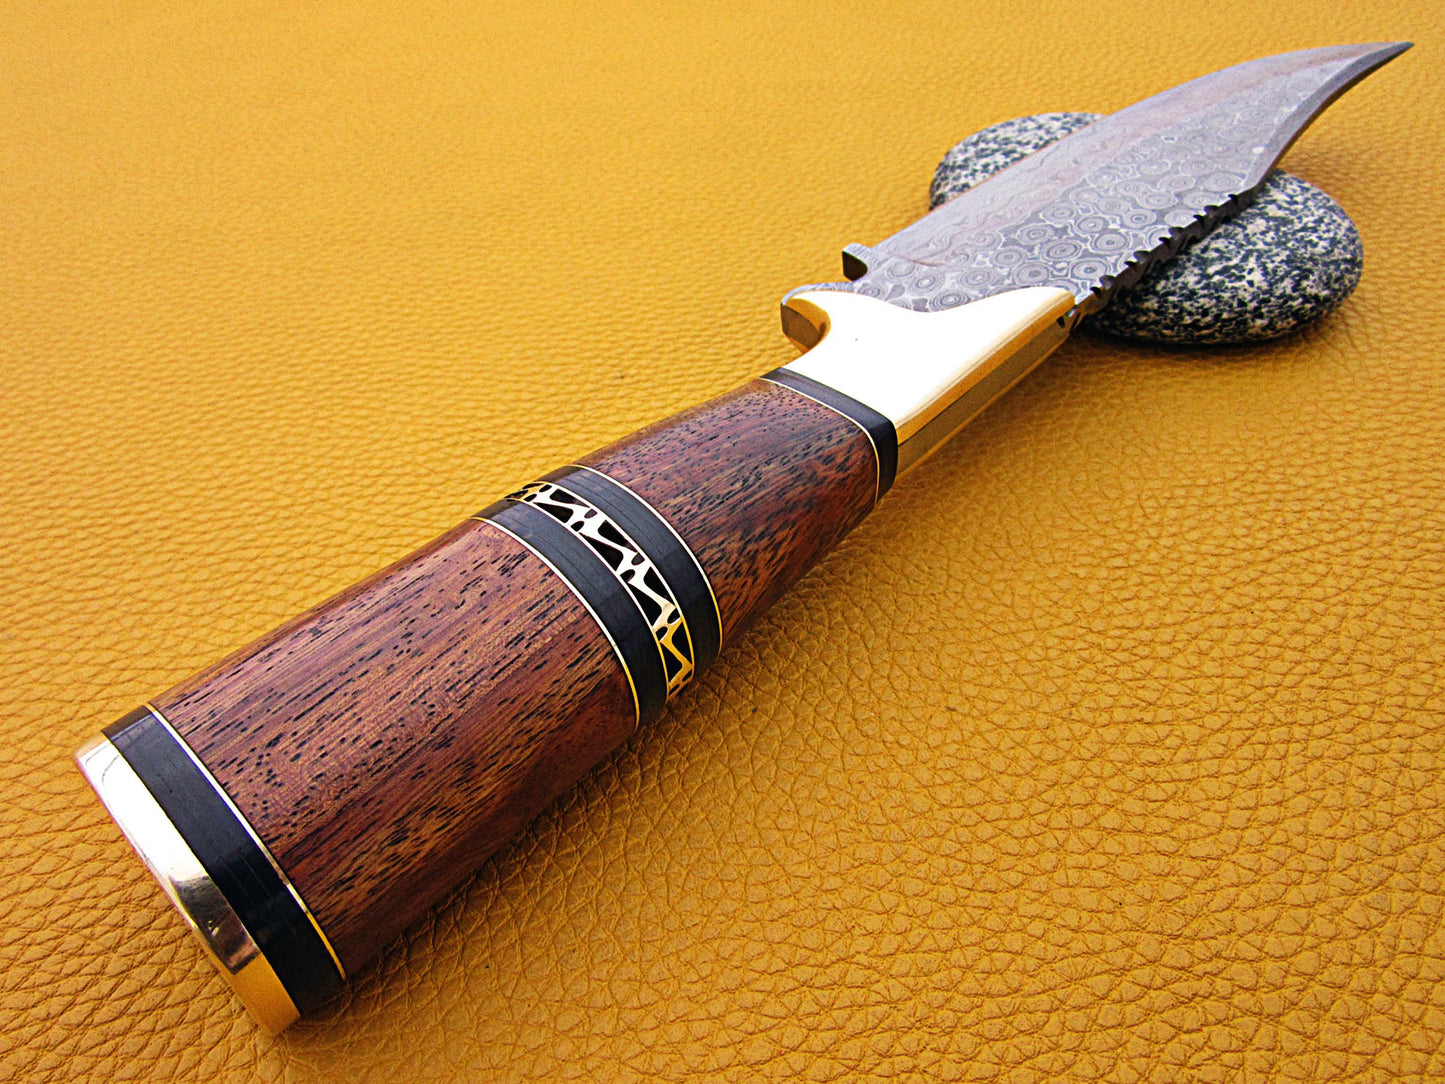 12" Long Damascus steel Skinning Knife hand forged Twist pattern Damascus steel, Rose wood round scale crafted with engraved brass spacer & cap, Cow hide leather sheath with belt loop